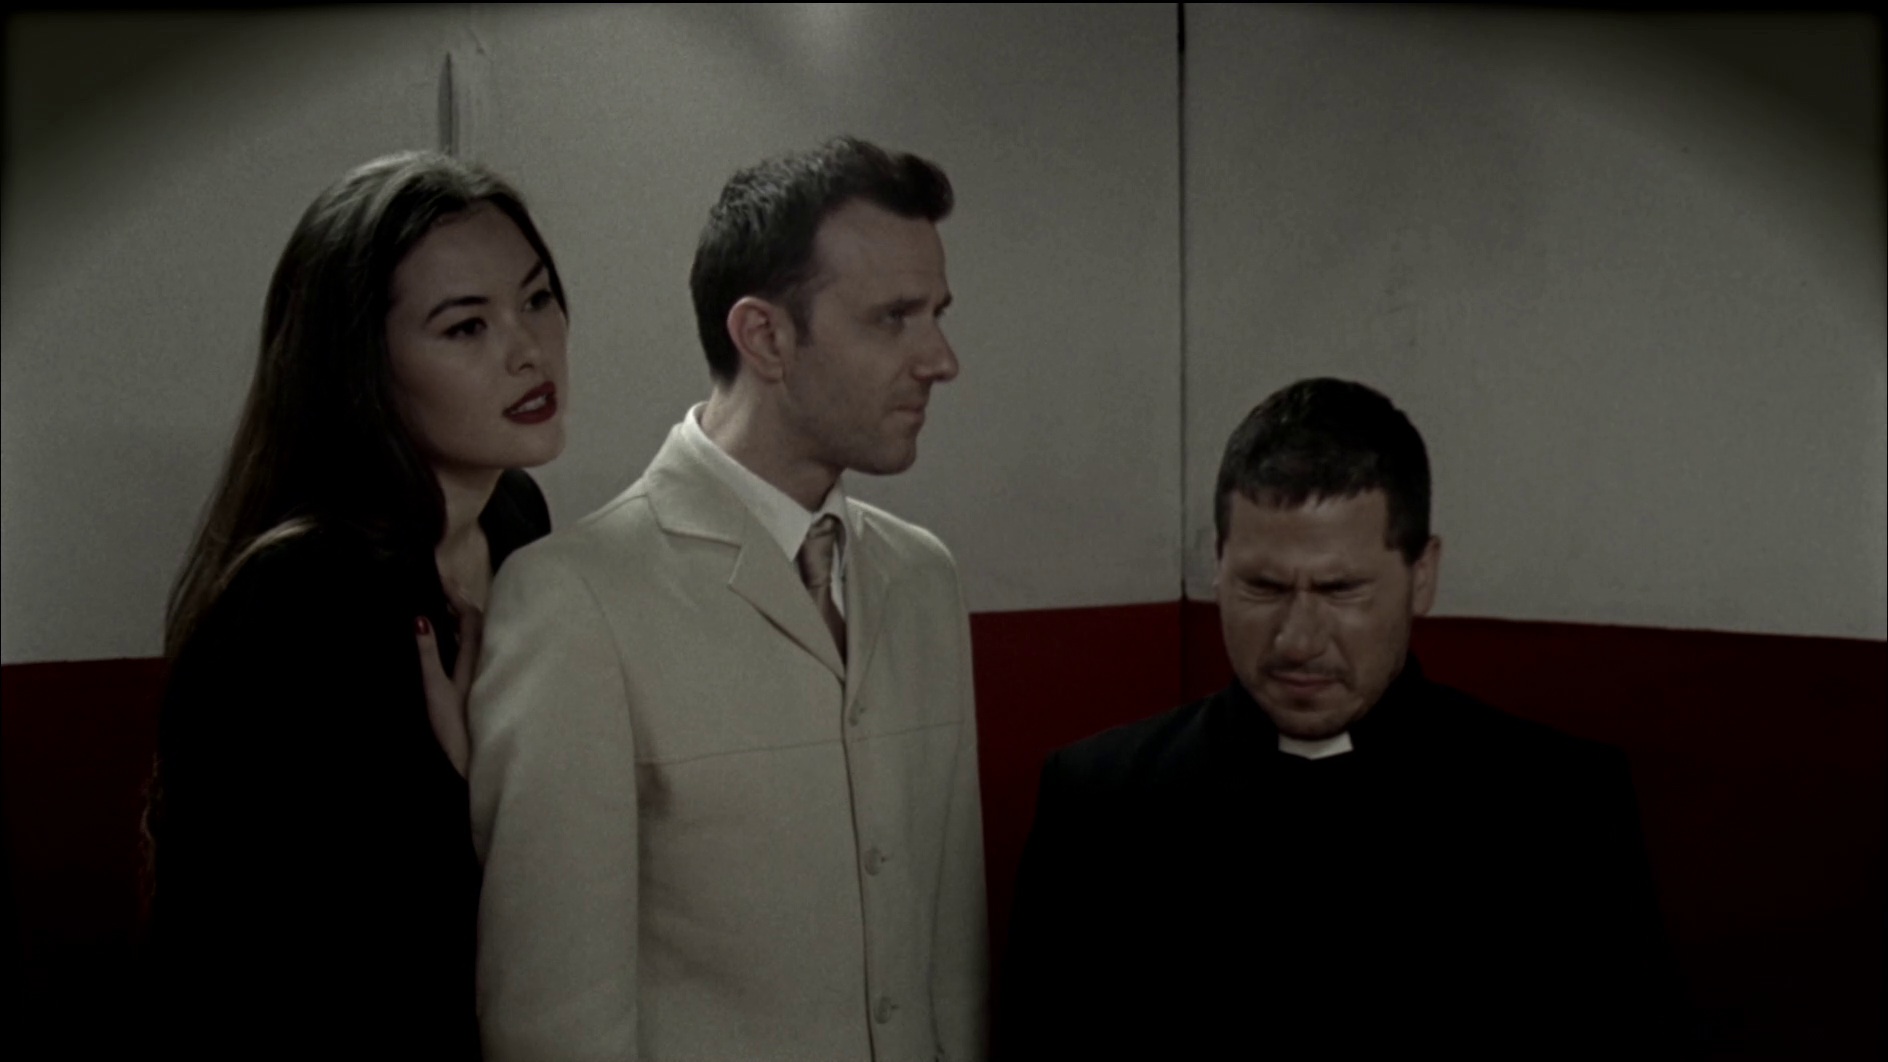 Screenshot of characters Demon, Angel and Priest in 'Free your mind & your ass will follow' directed by. Aadhar Gupta